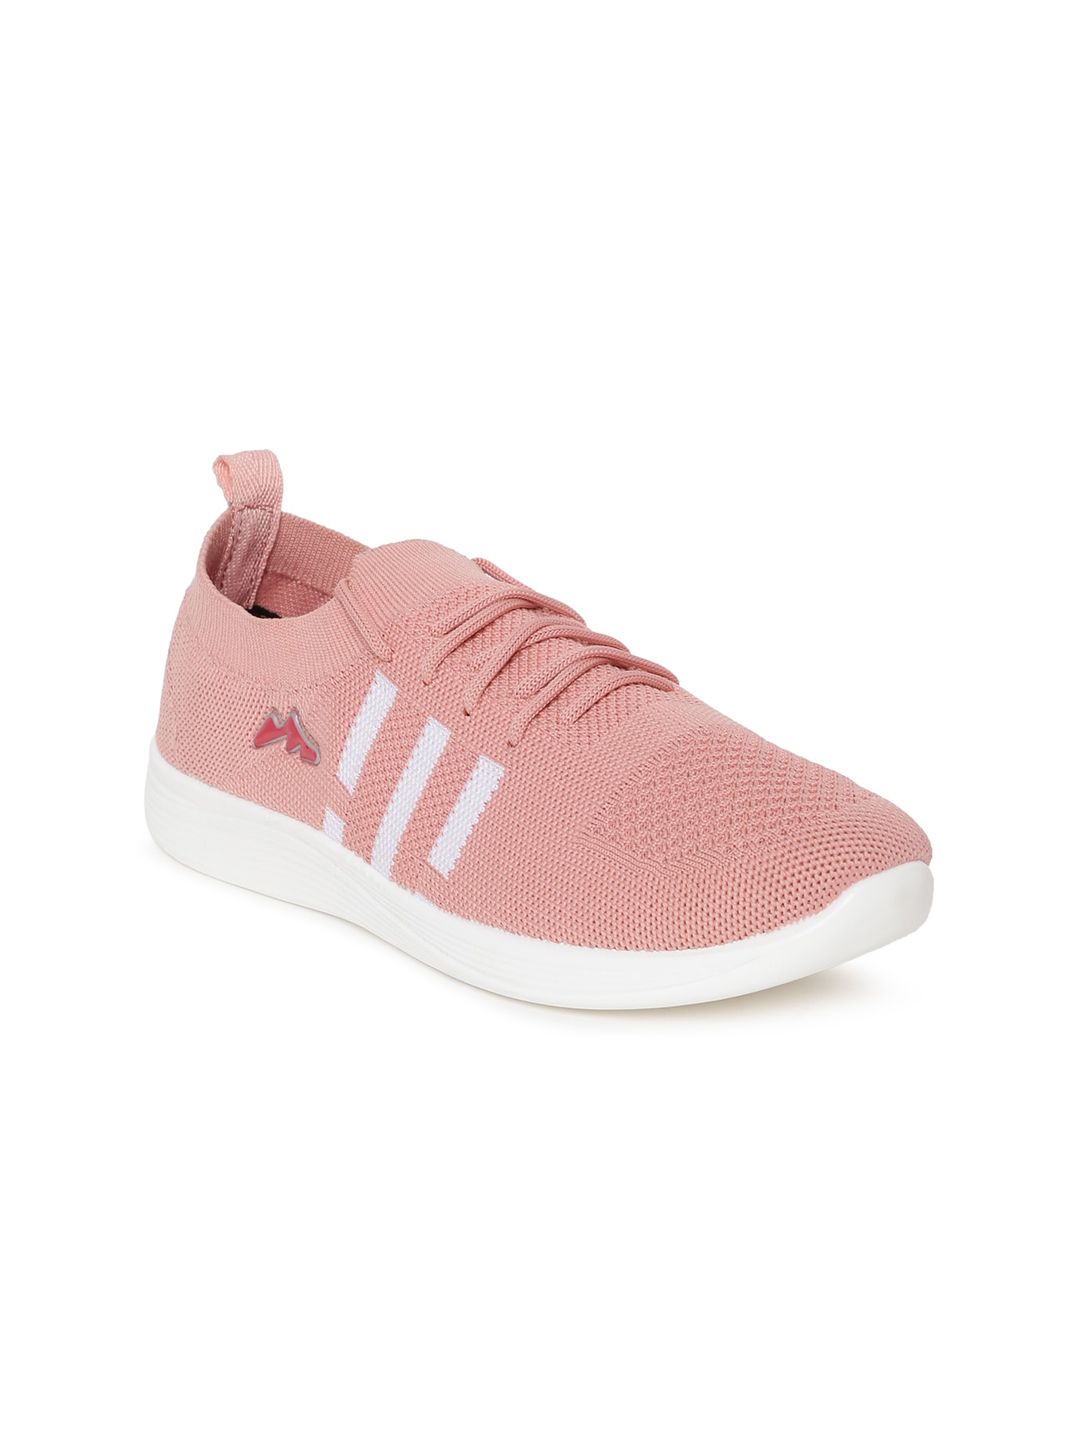 Paragon Women Woven Design Sneakers Price in India